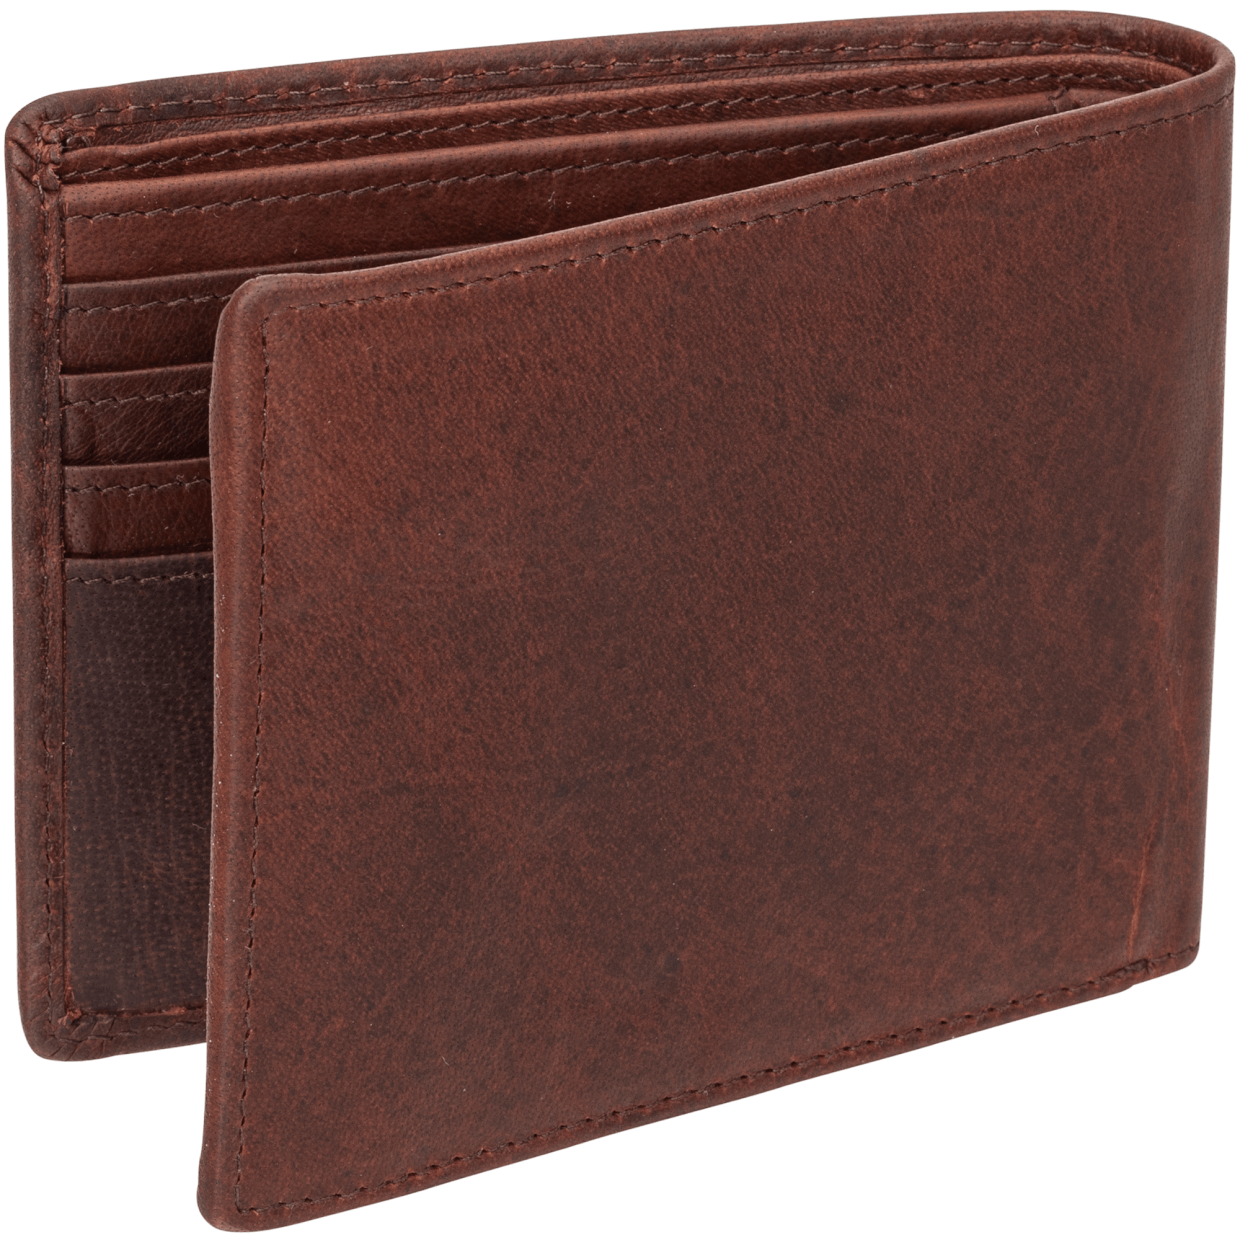 Mancini BUFFALO RFID Secure Wallet with Coin Pocket